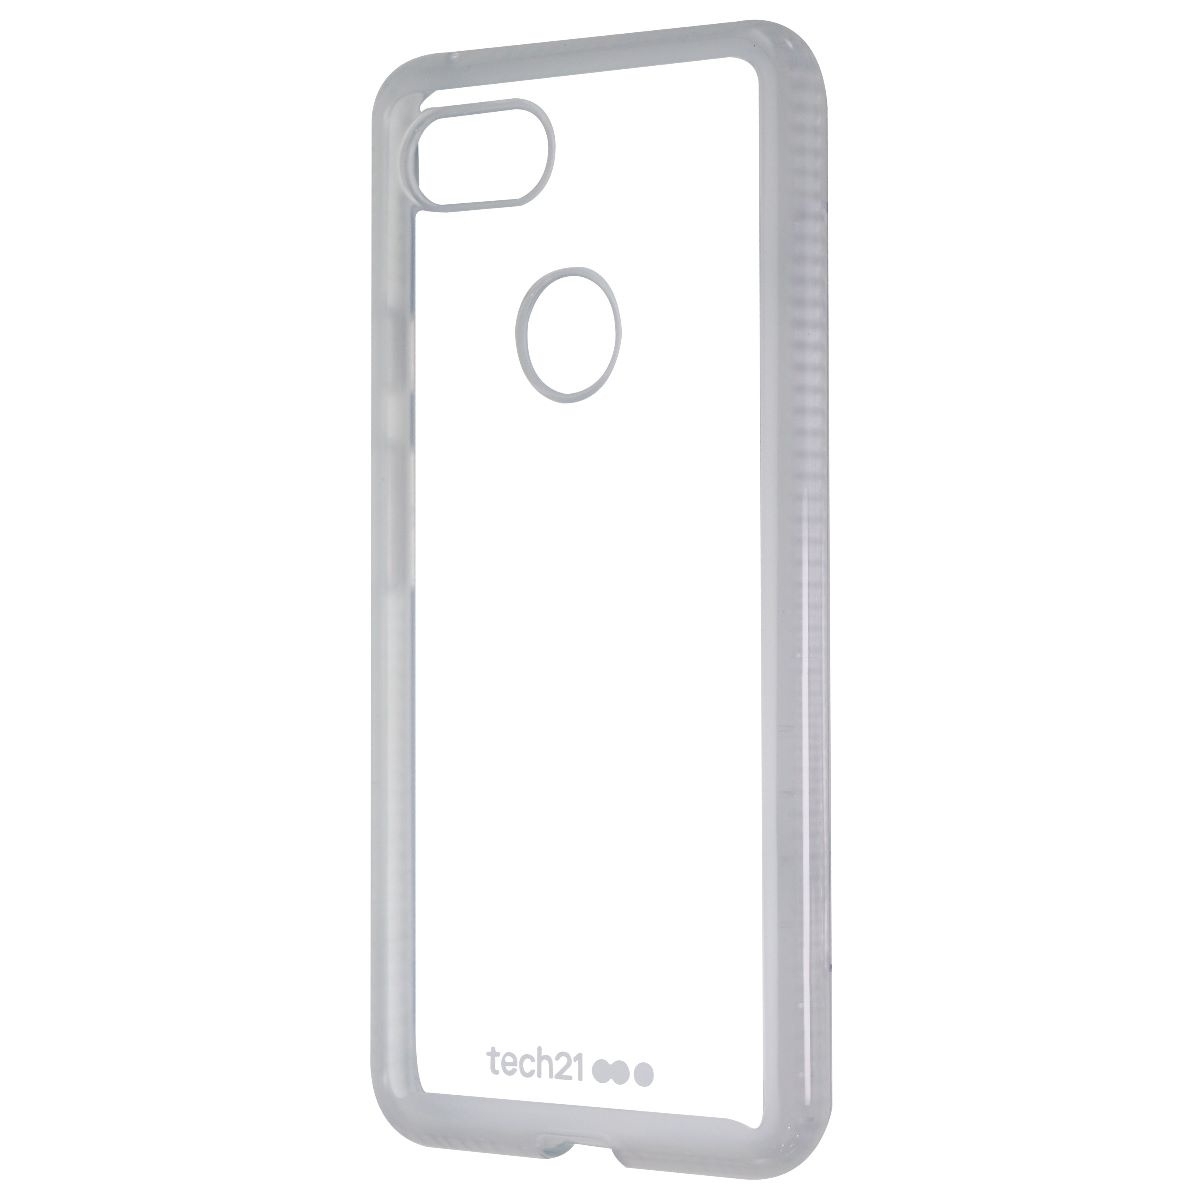 Tech21 Pure Clear Series Hybrid Case For Google Pixel 3 XL - Clear